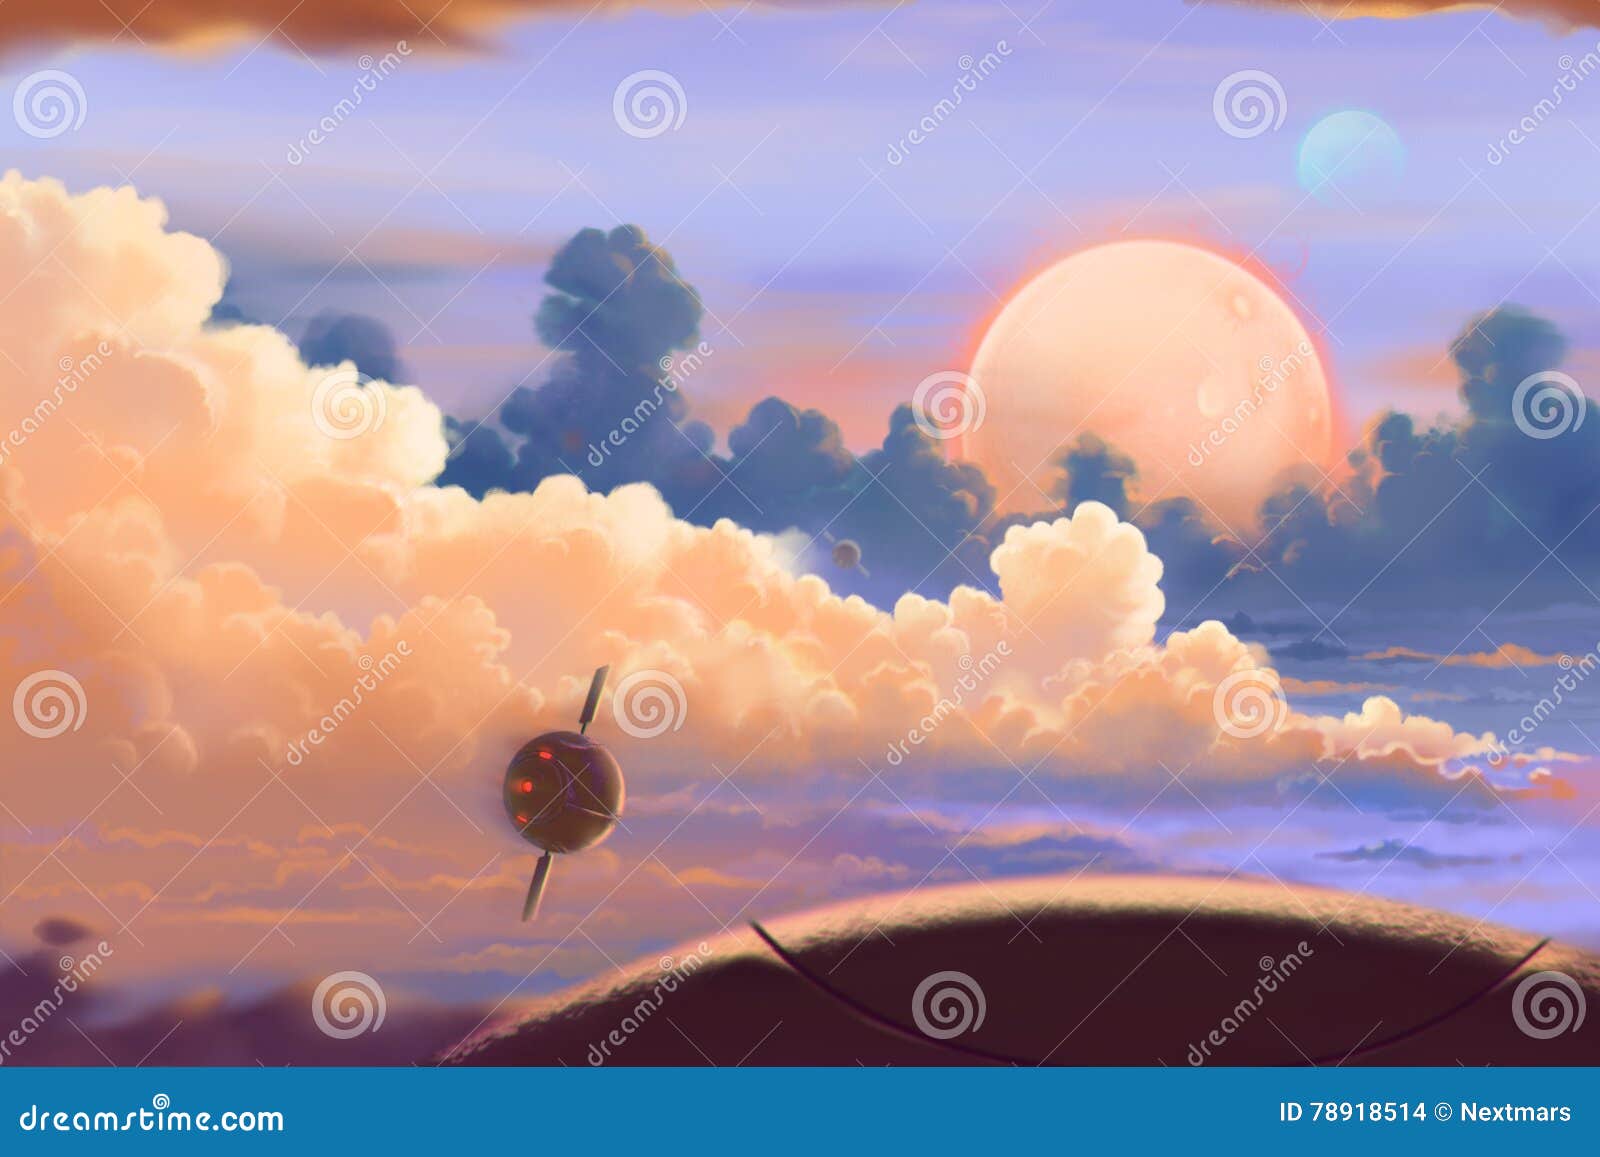 fantastic and exotic allen planets environment: up in the air.